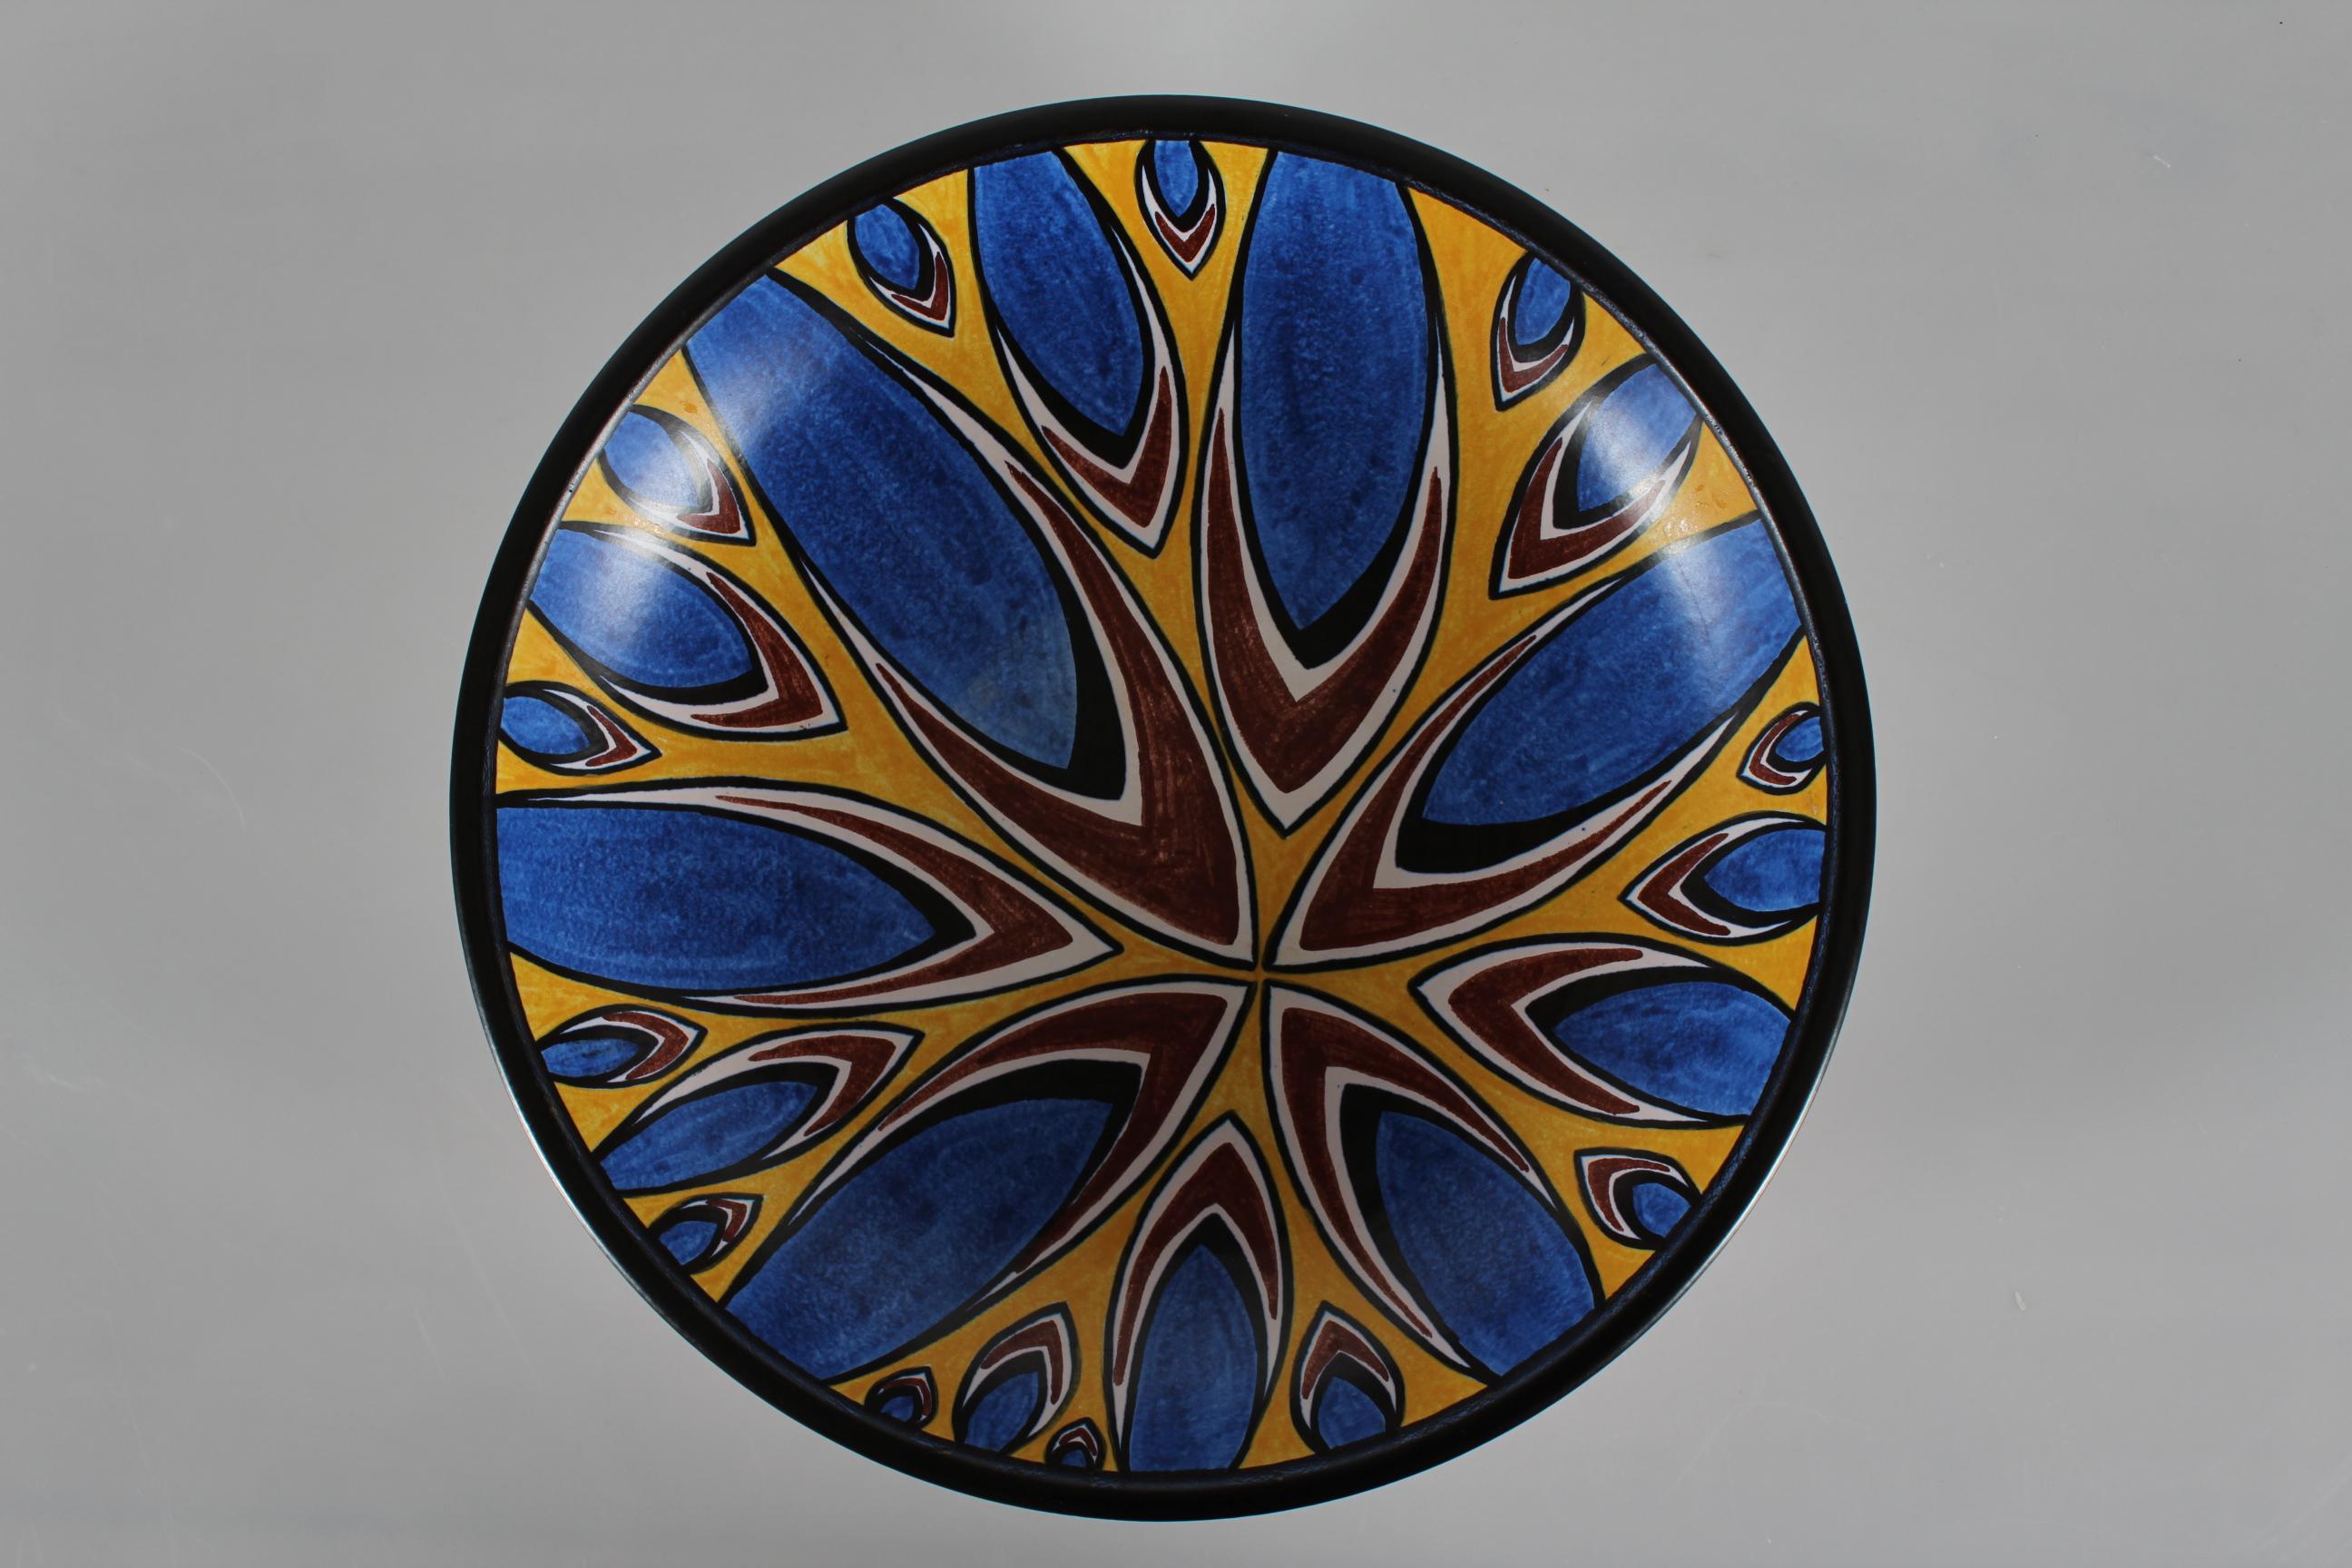 Glazed Large Søholm Ceramic Low Bowl with Graphic Pattern in Bright Colors, 1960s For Sale